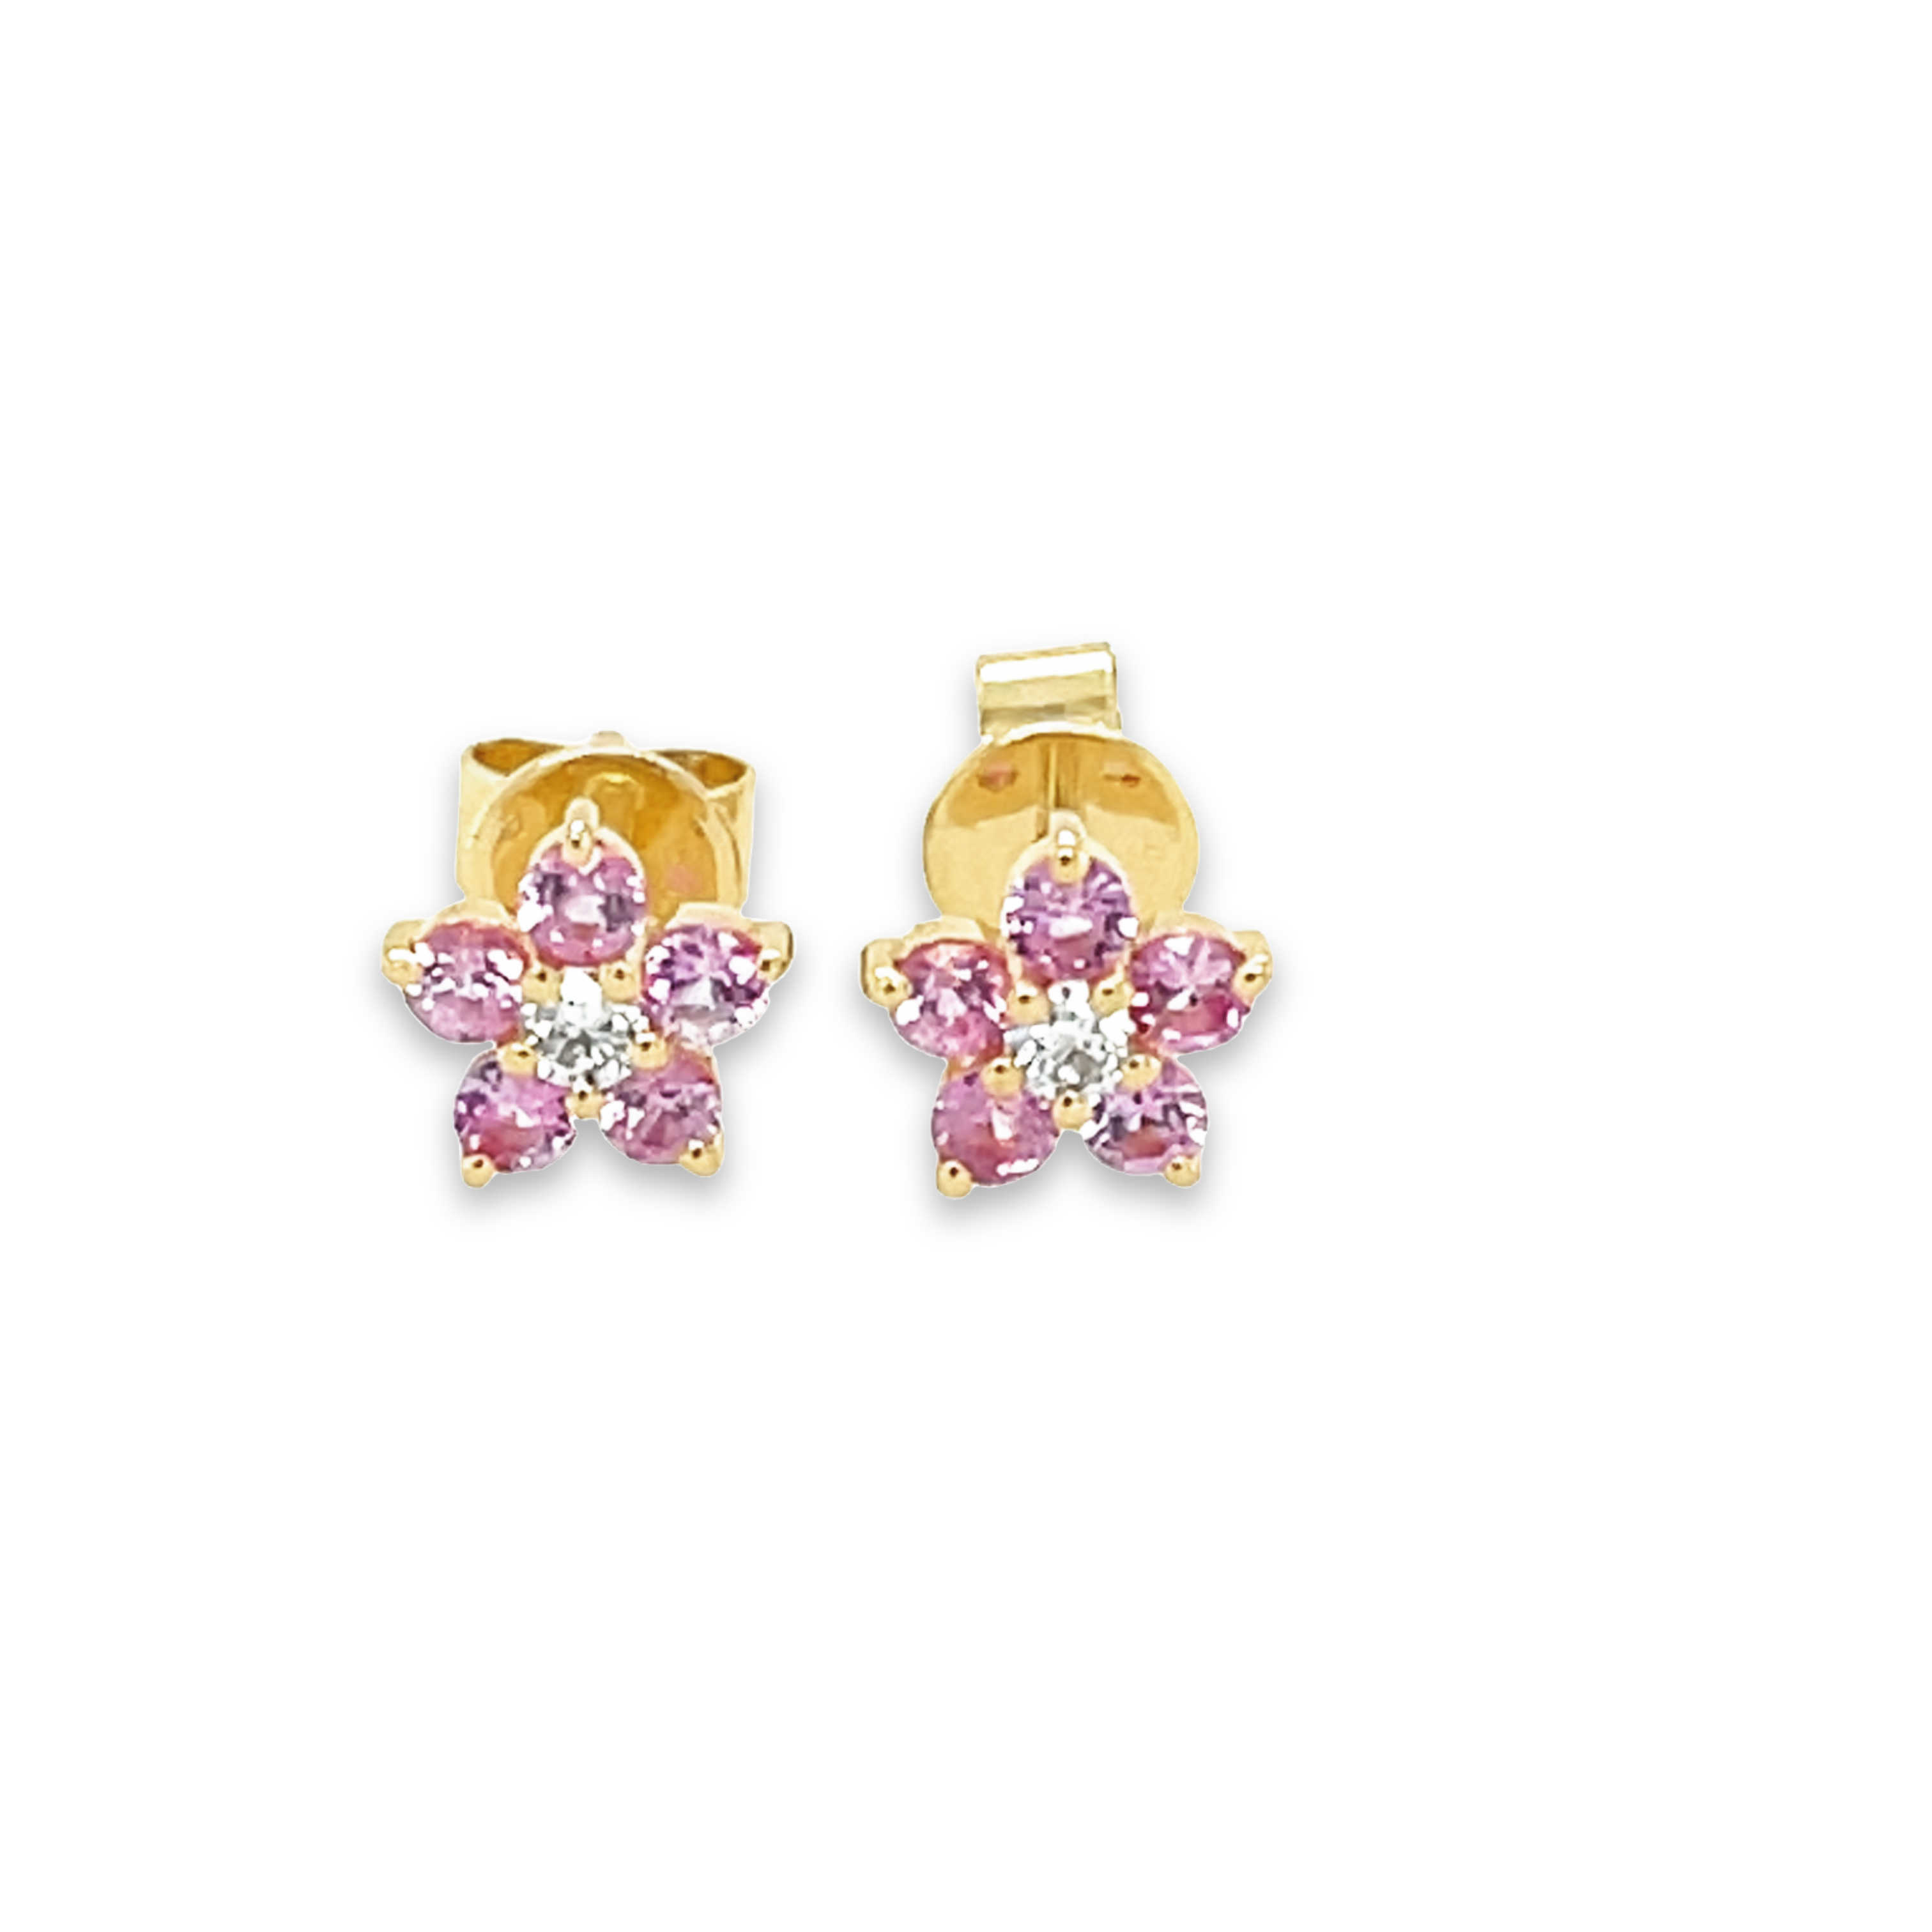 Featured image for “Pink Flower Earrings”